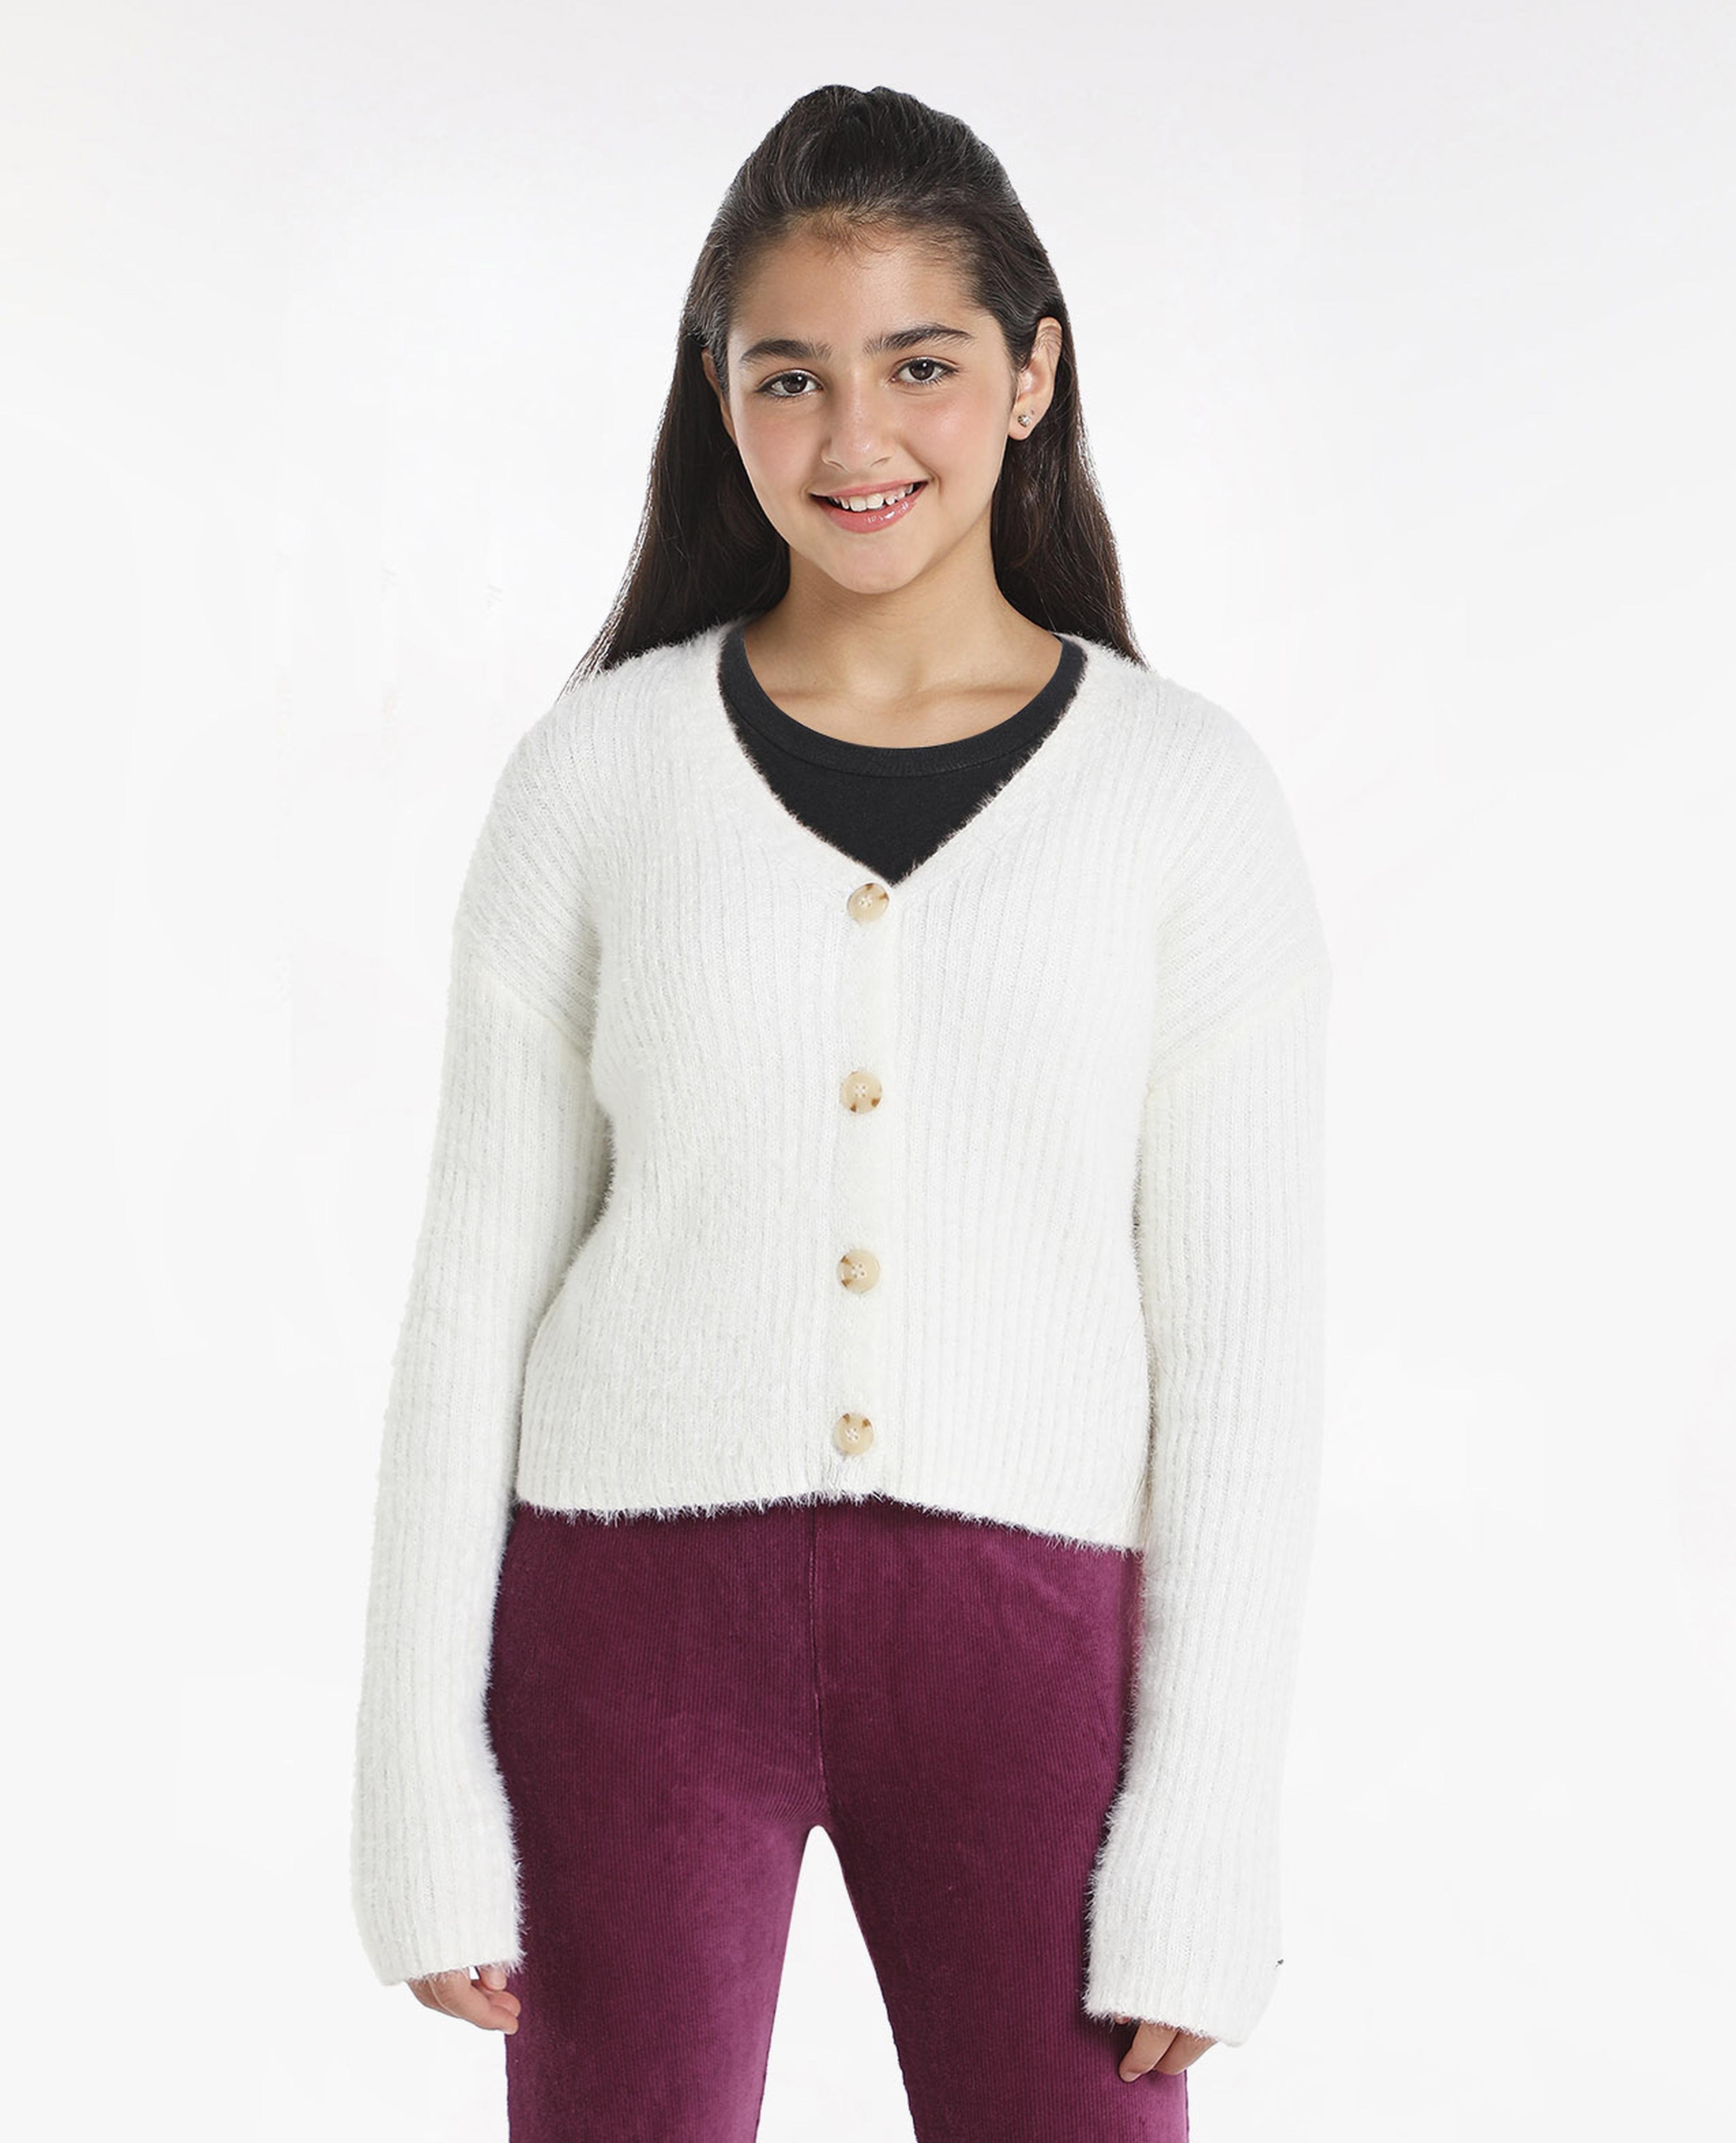 Button Detailed Sweater with V-Neck and Long Sleeves